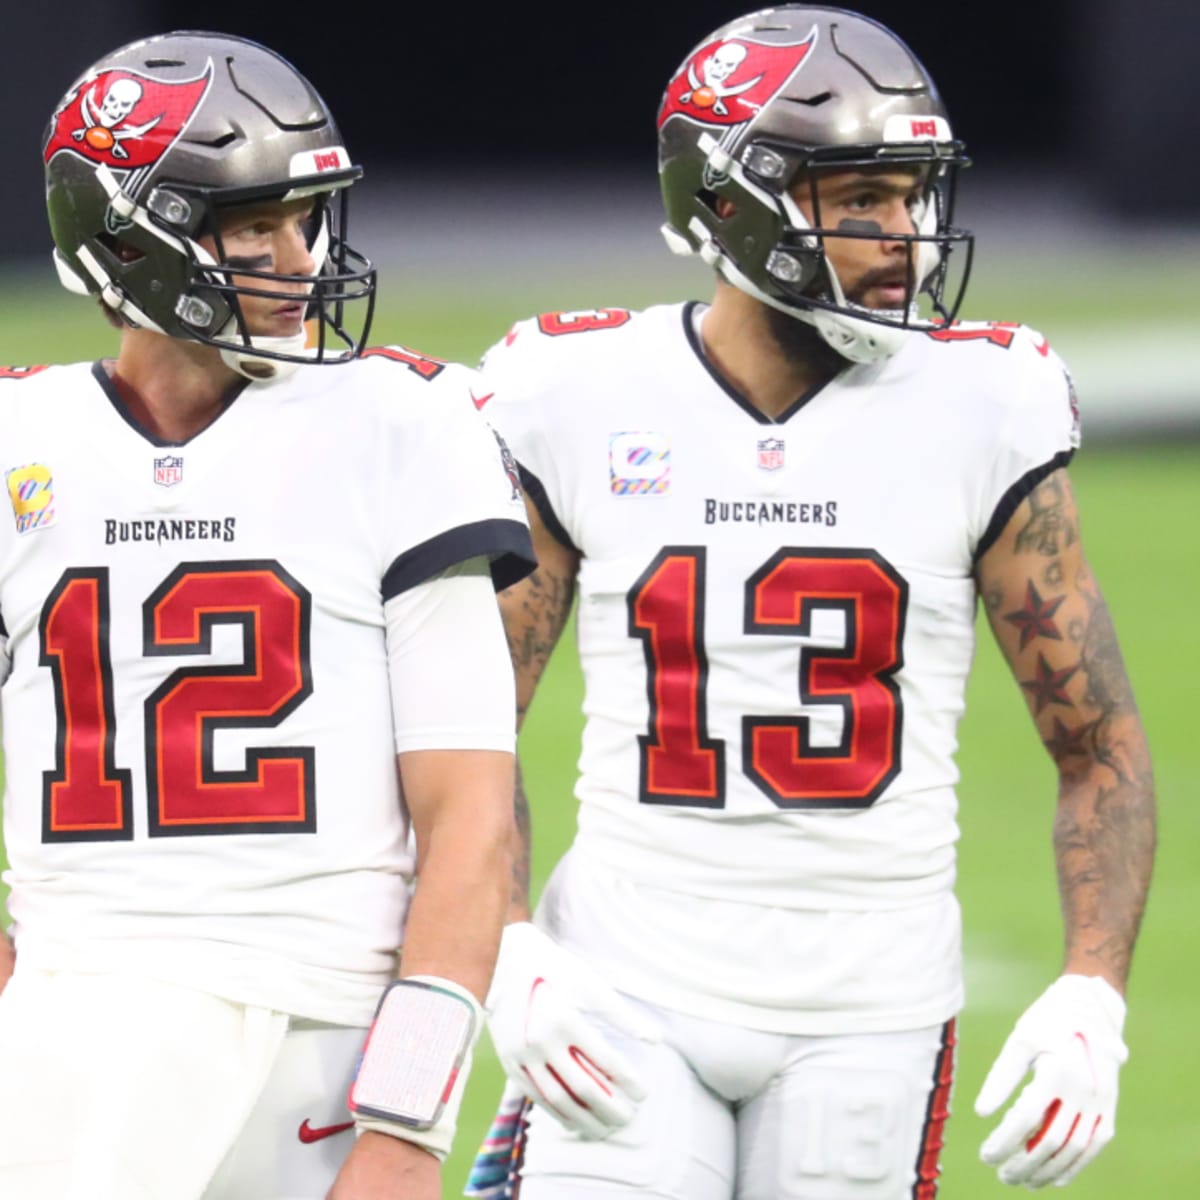 You can't half-a** anything with Tom Brady: Mike Evans says